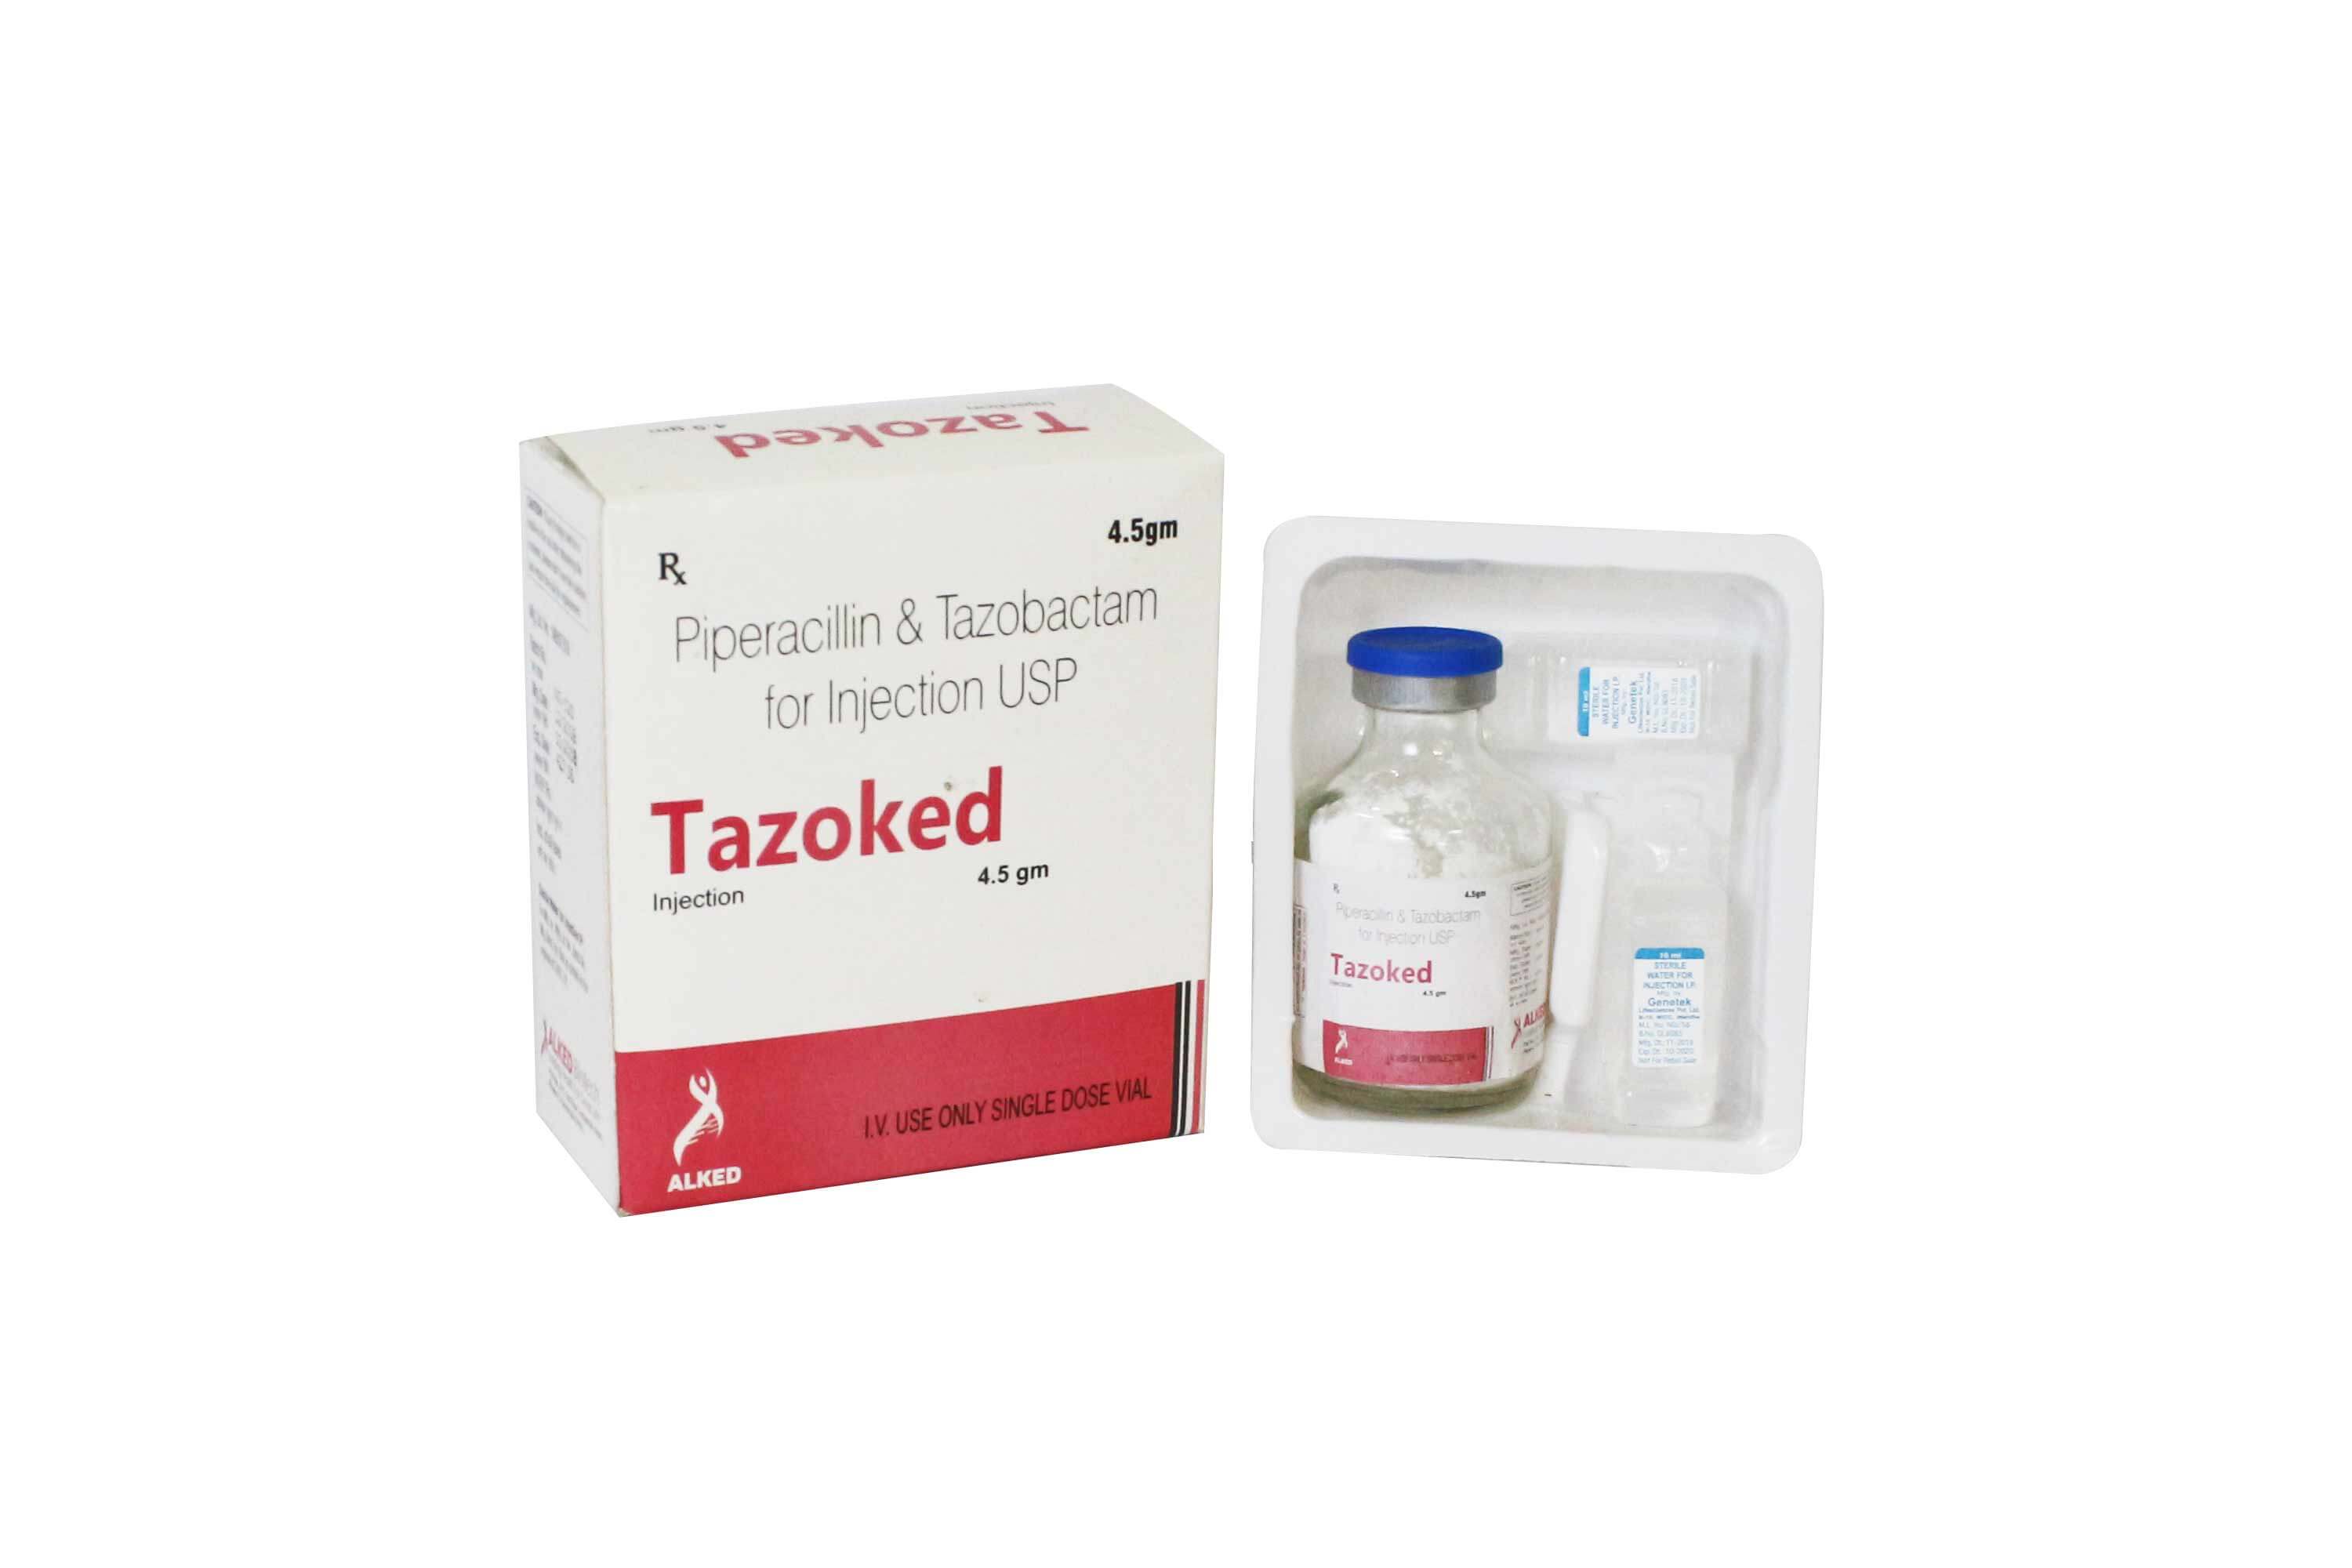 Product Name: Tazoked, Compositions of Tazoked are Piperacilli & Tazobactam for Injection USP - Numantis Healthcare